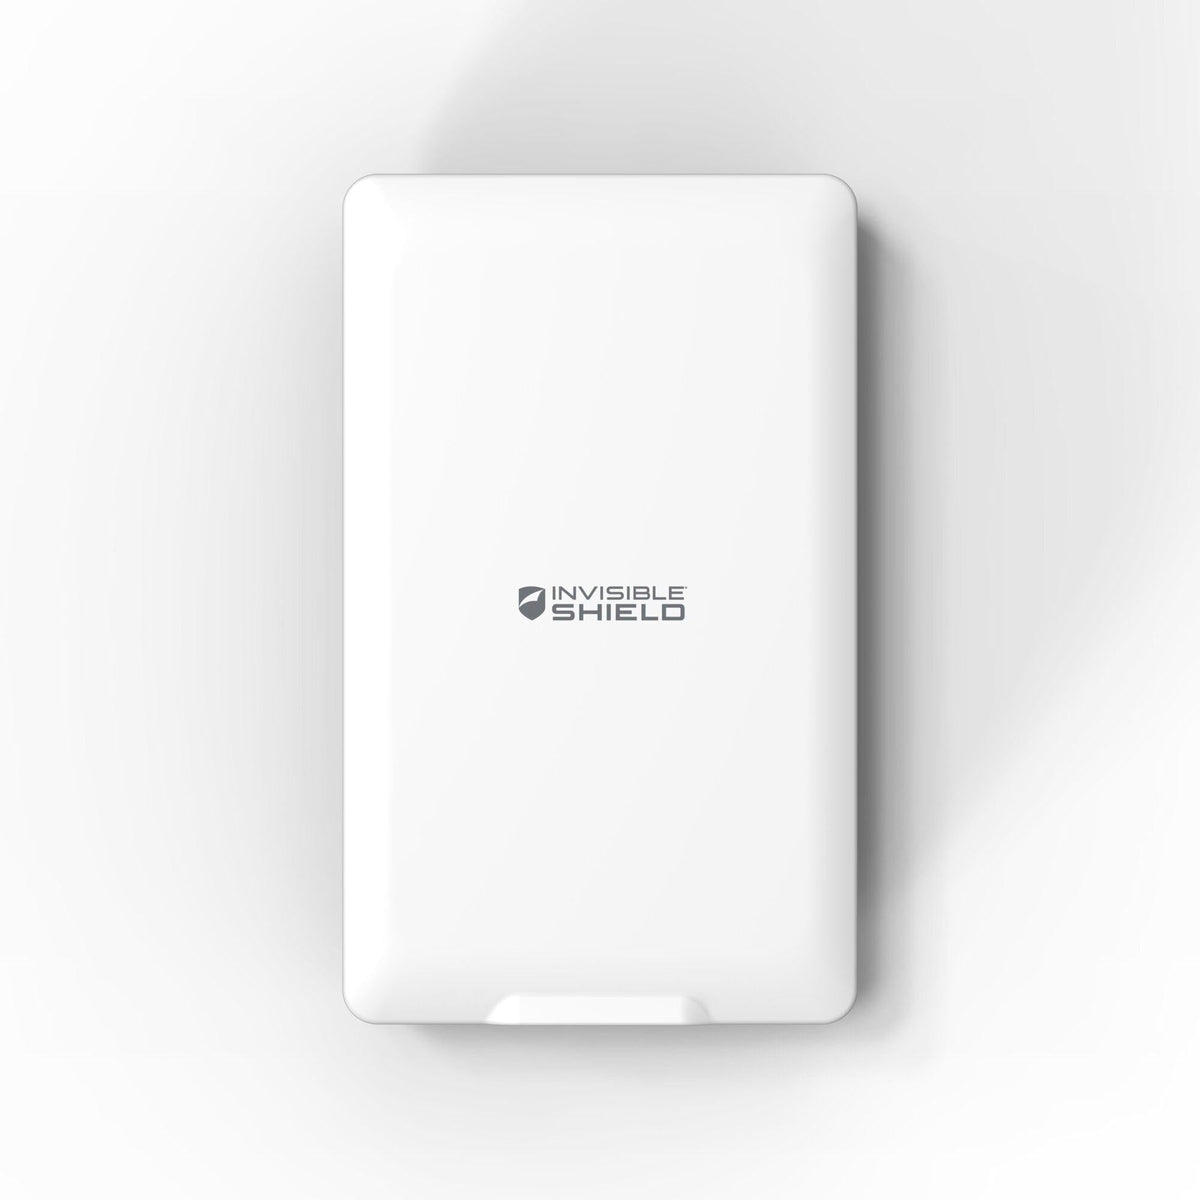 InvisibleShield UV Phone Sanitizer - White | 209906215 from DID Electrical - guaranteed Irish, guaranteed quality service. (6977575420092)